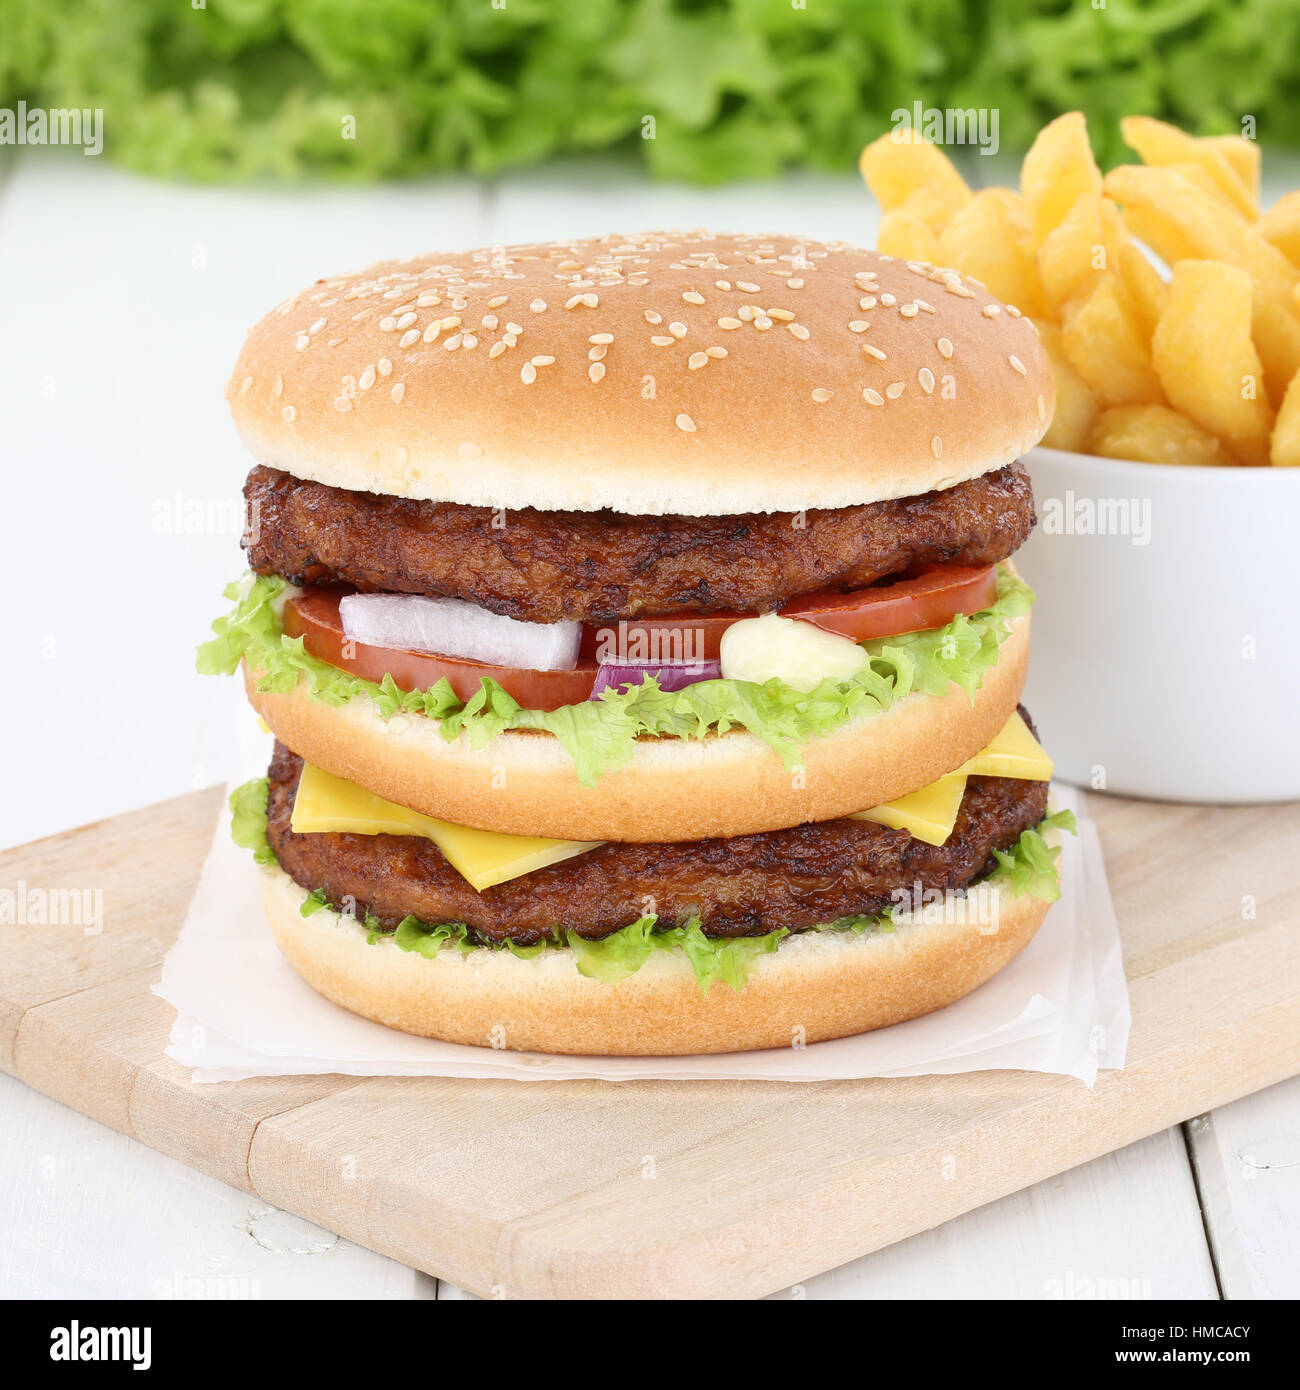 Double burger hamburger and fries beef tomatoes lettuce cheese unhealthy Stock Photo